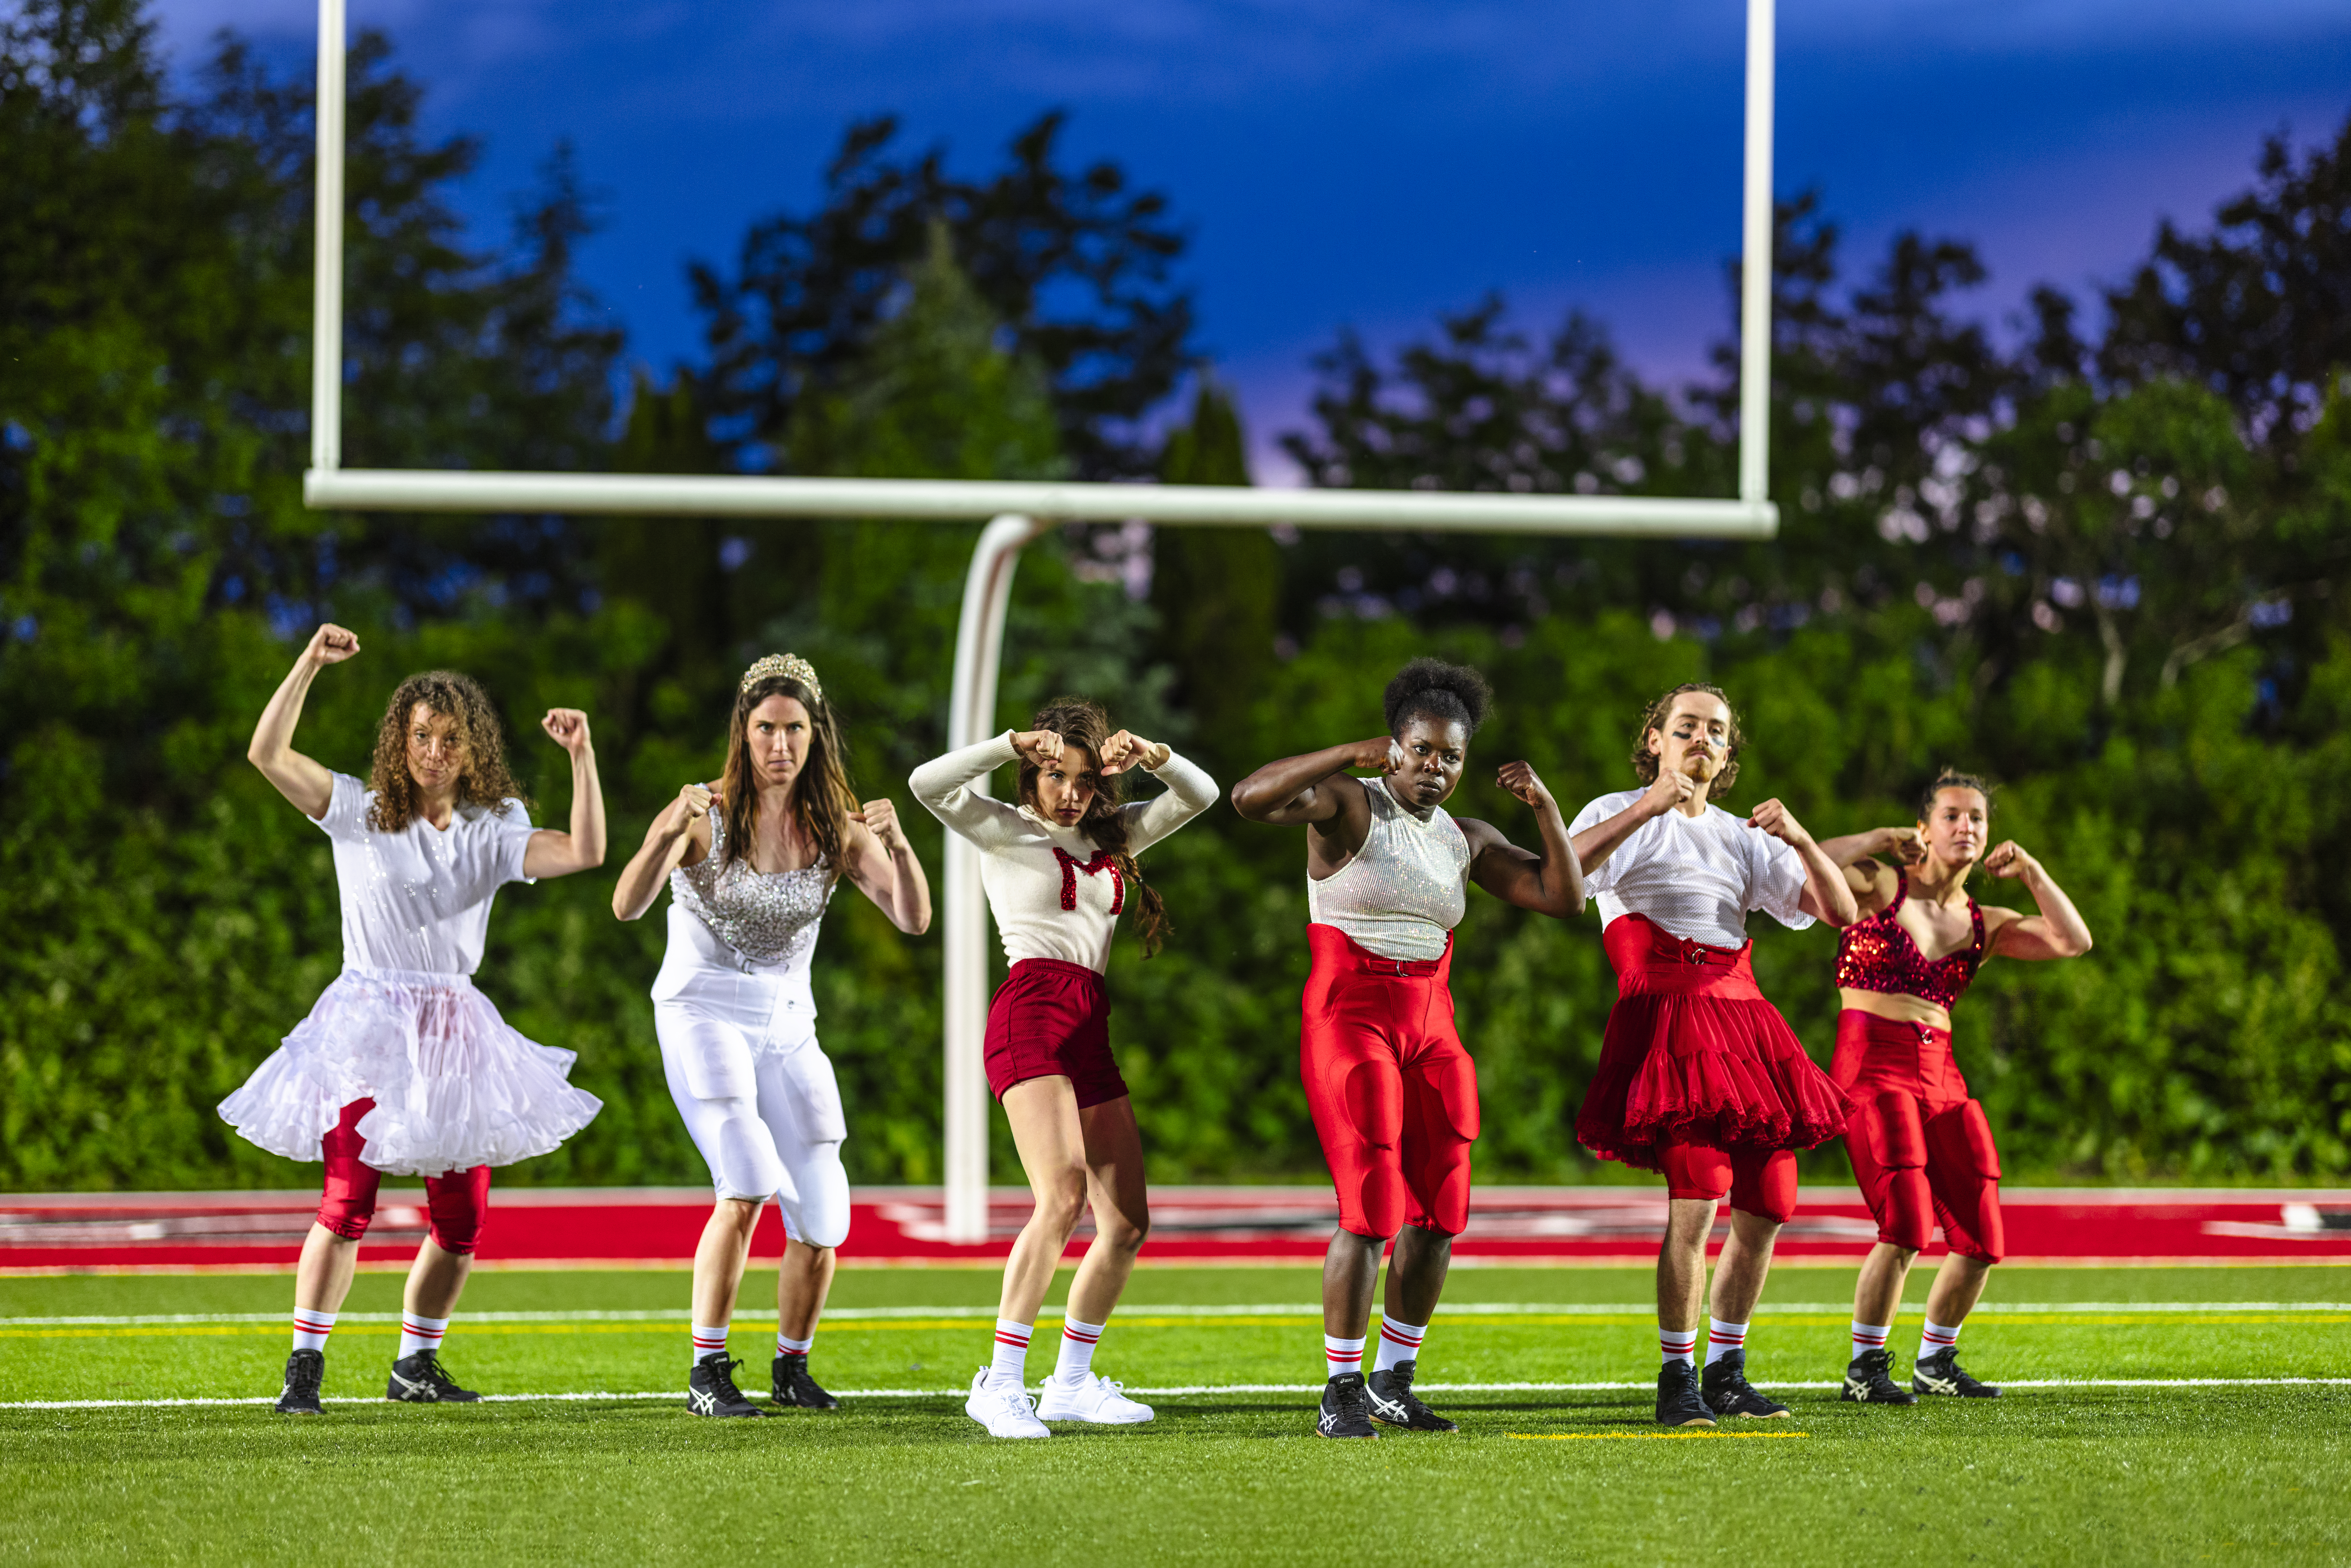 The members of Flip Fabrique pose on a football field